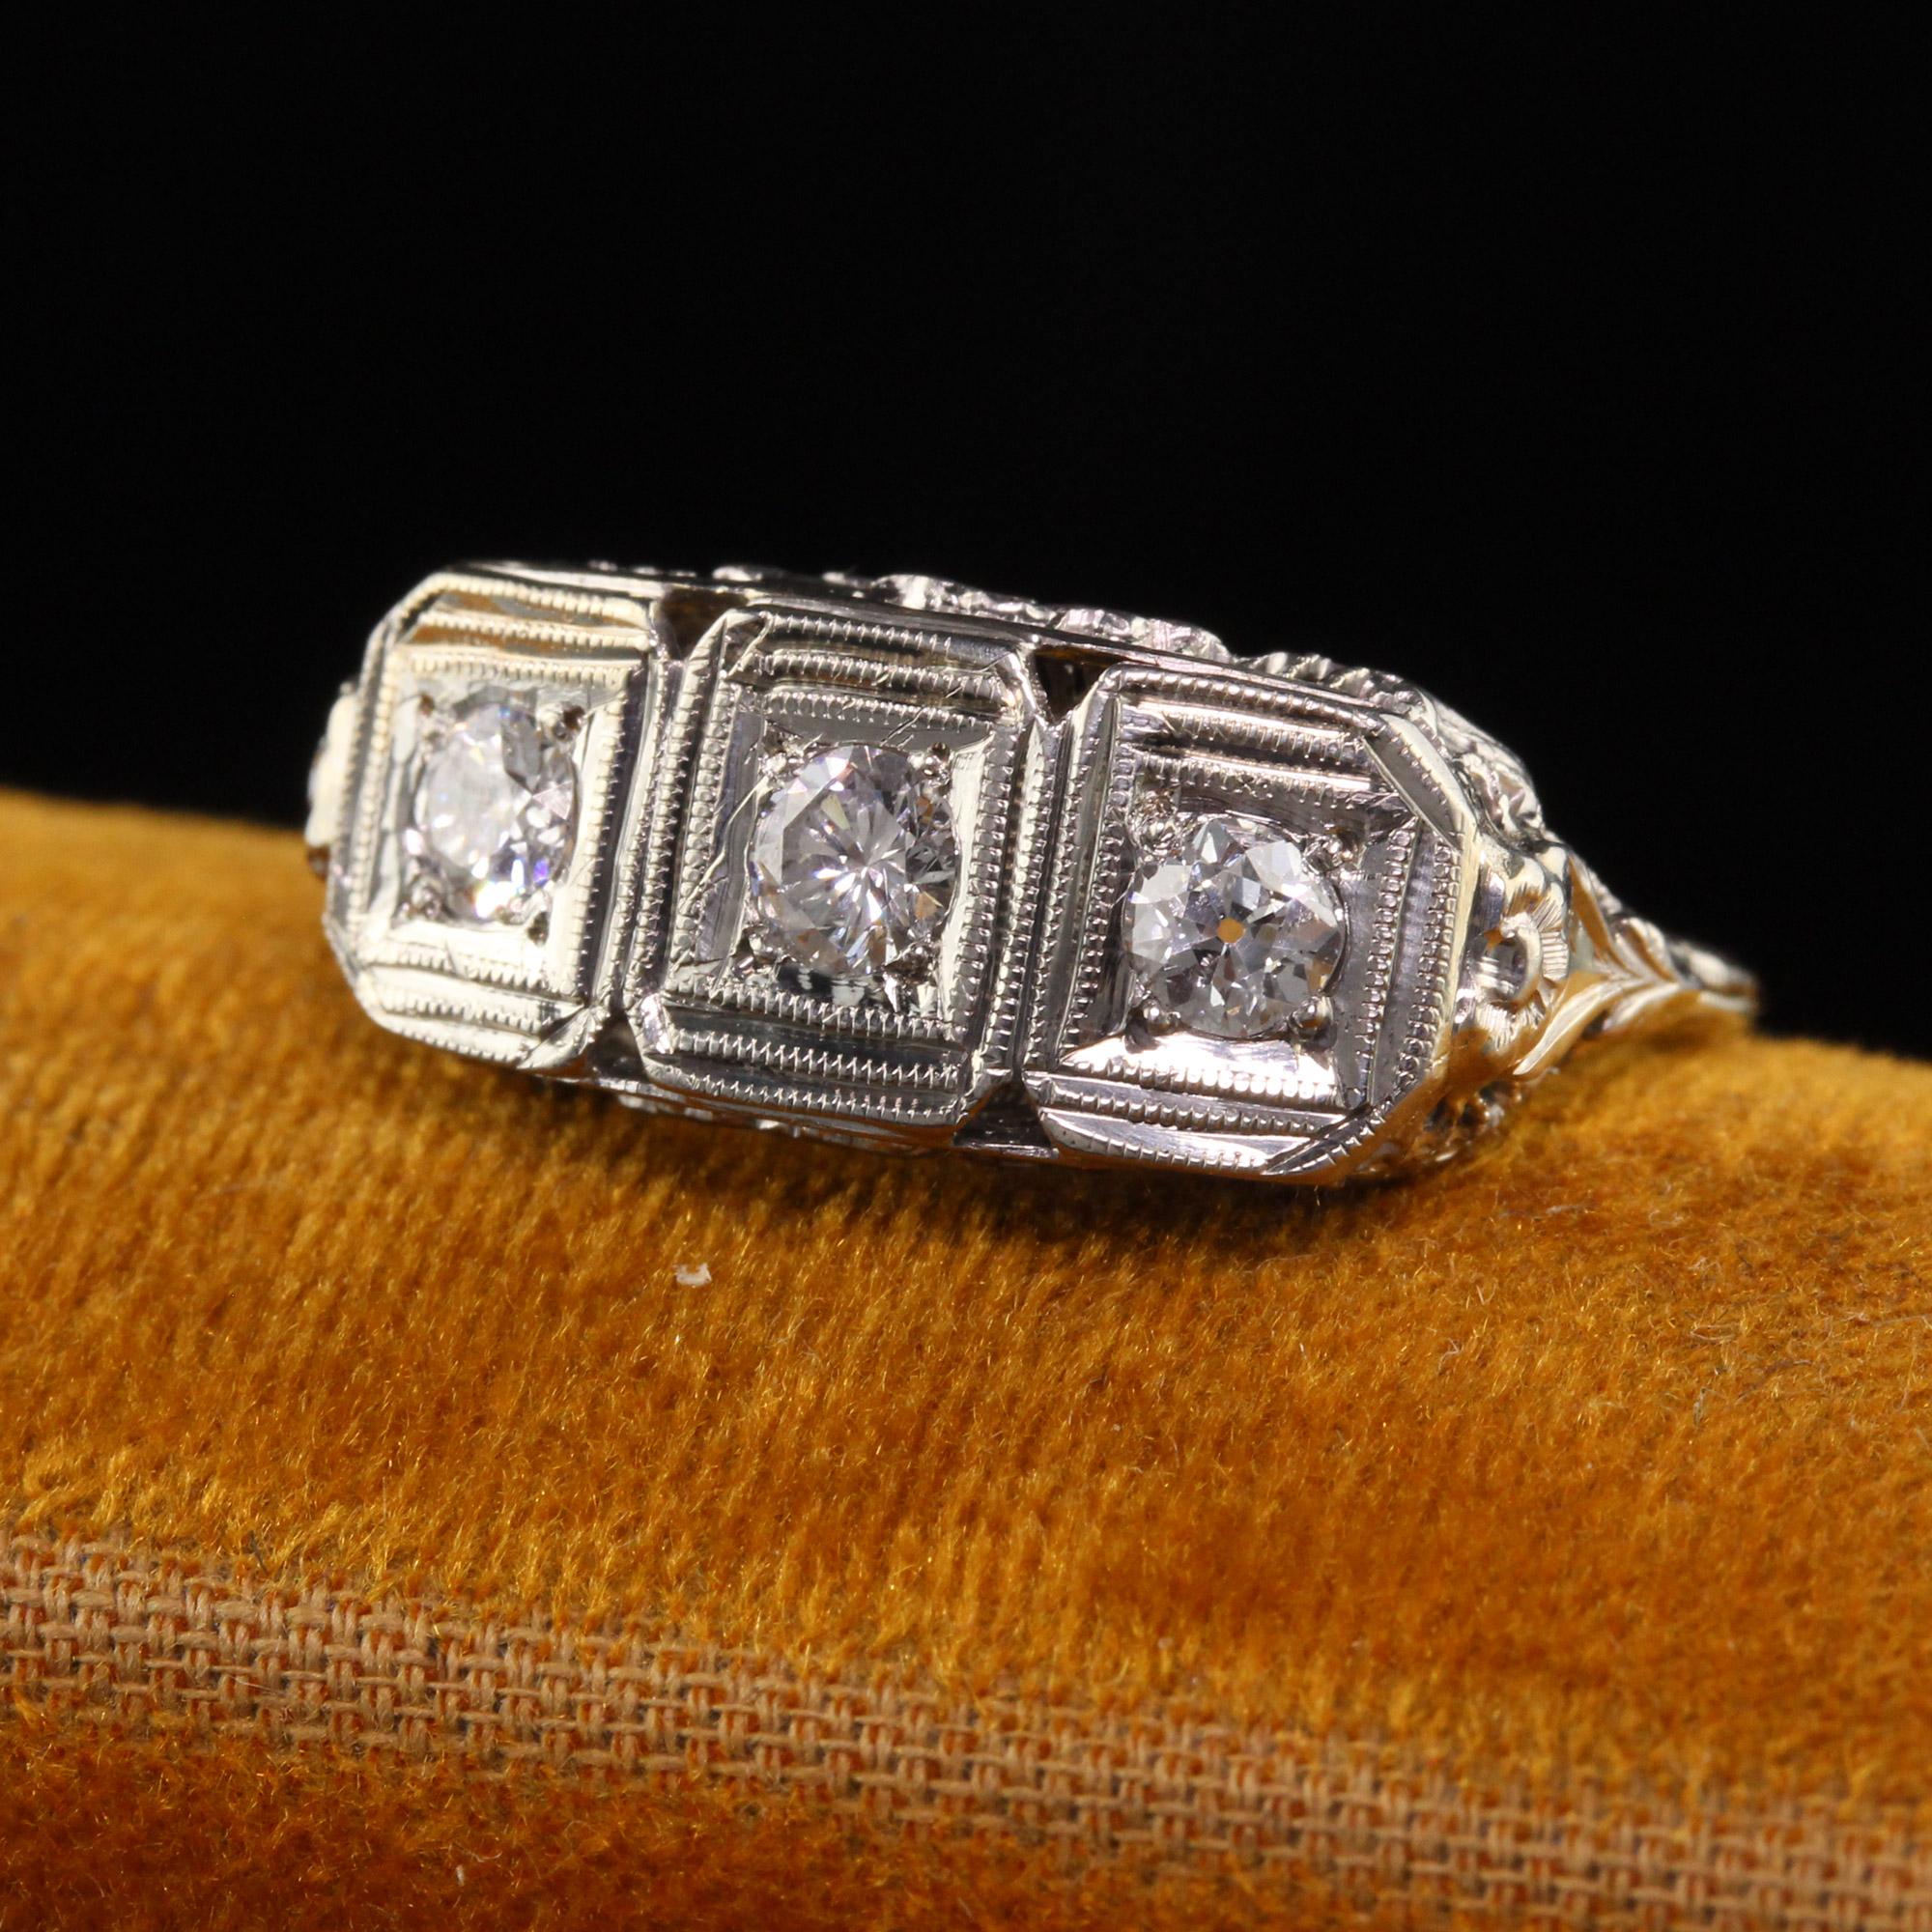 Beautiful Antique Art Deco 14K White Gold Old European Diamond Three Stone Ring. This classic three stone ring is crafted in 14k white gold. The diamonds are old european cut and are set in a Art Deco filigree mounting.

Item #R1240

Metal: 14K